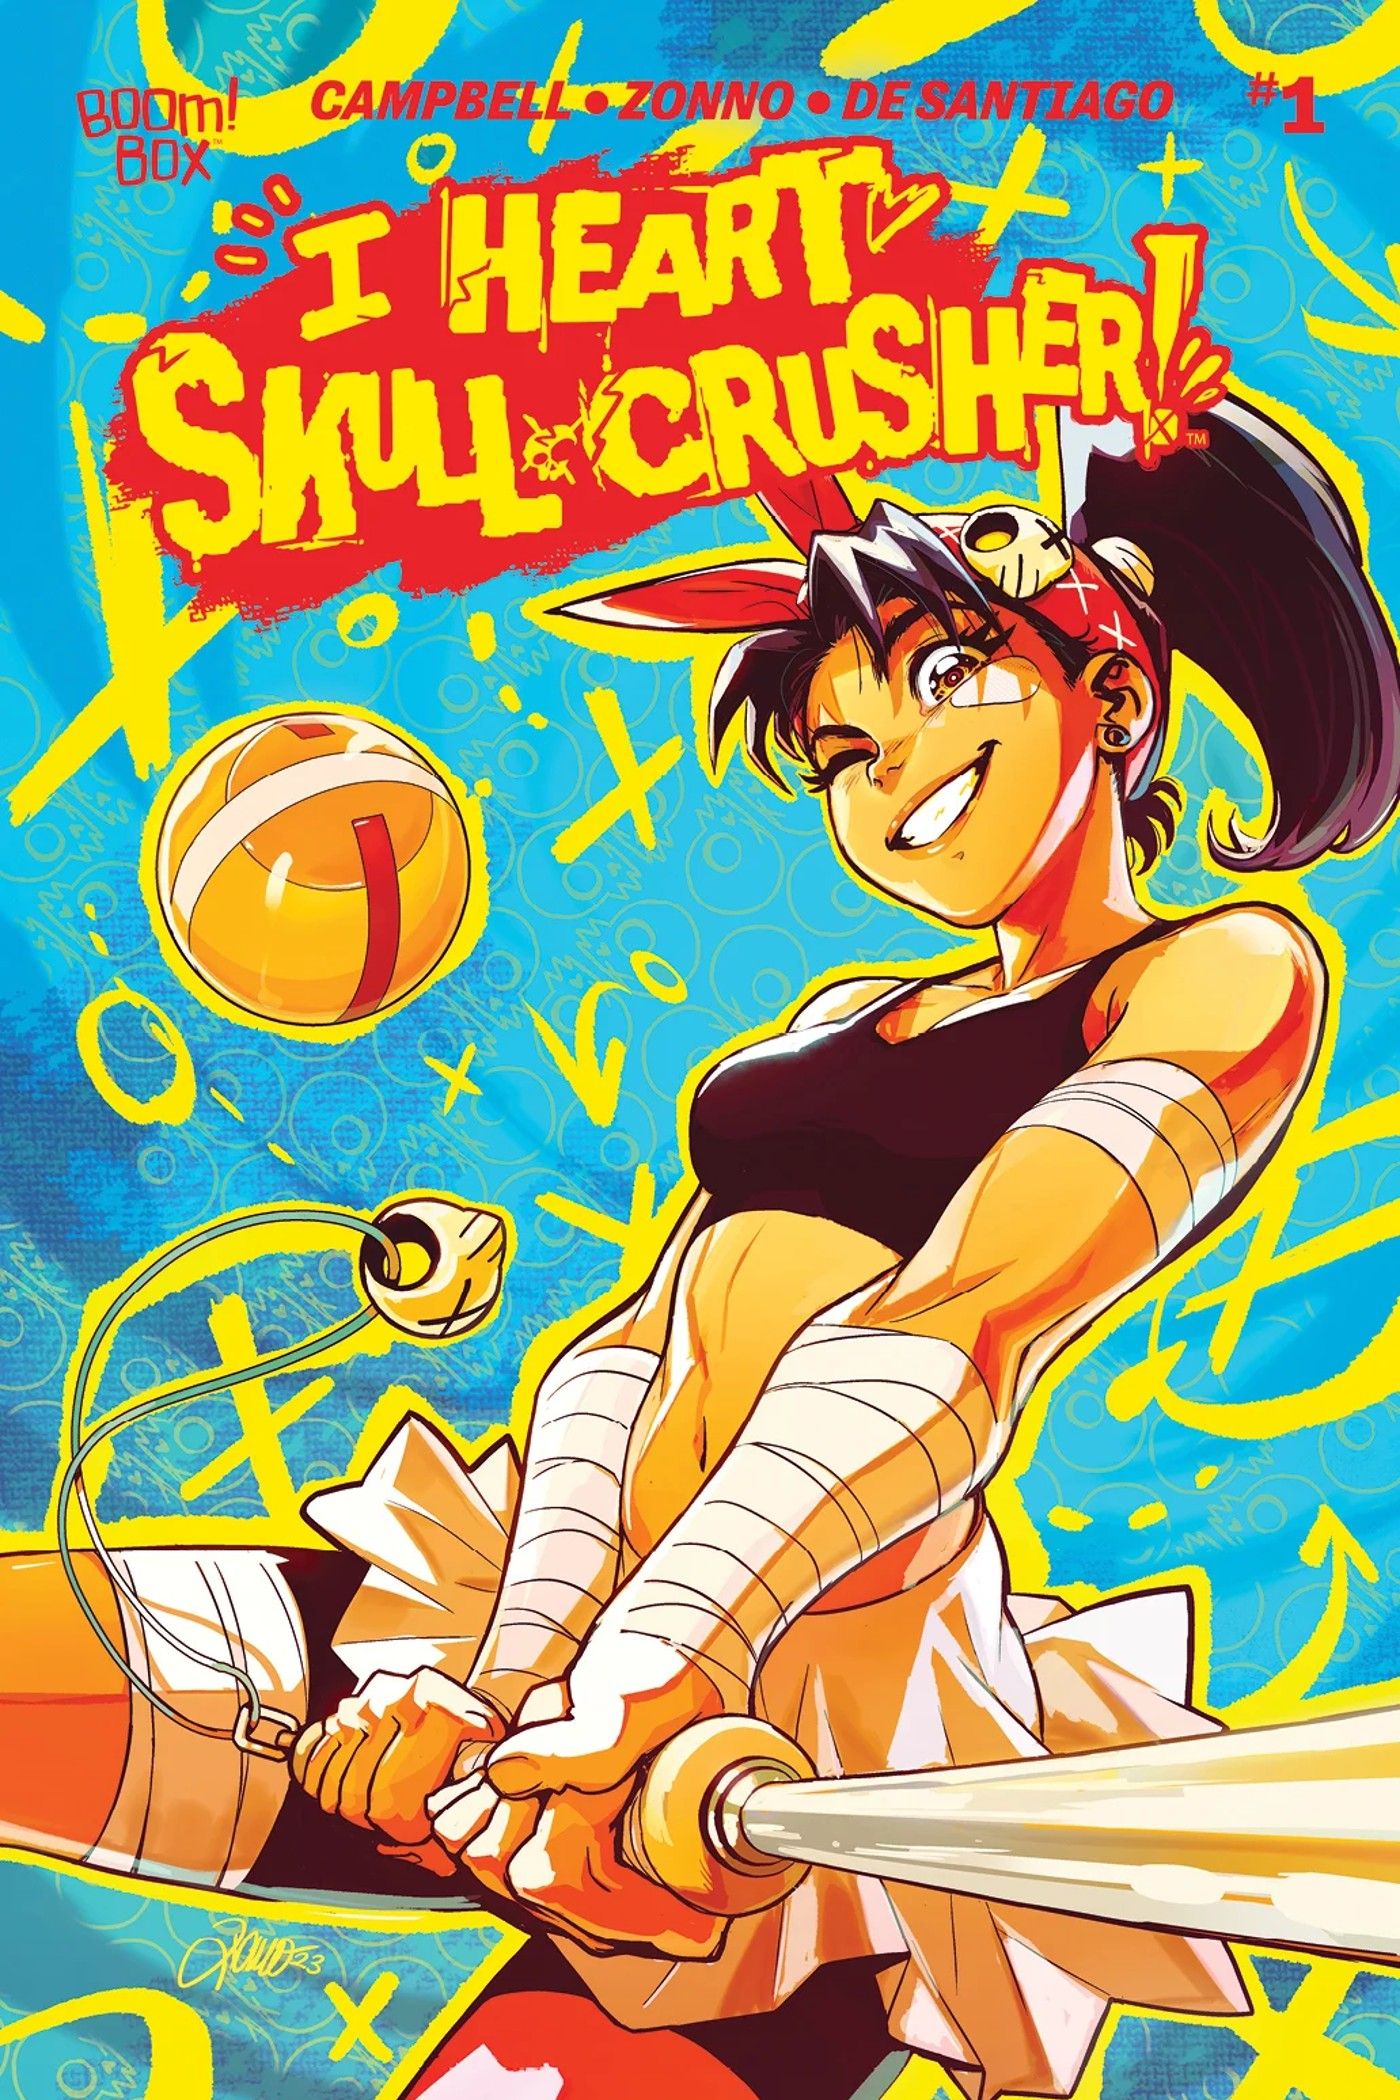 Mad Max Meets Rollerball in Epic New Trailer for I HEART SKULL-CRUSHER (Exclusive)